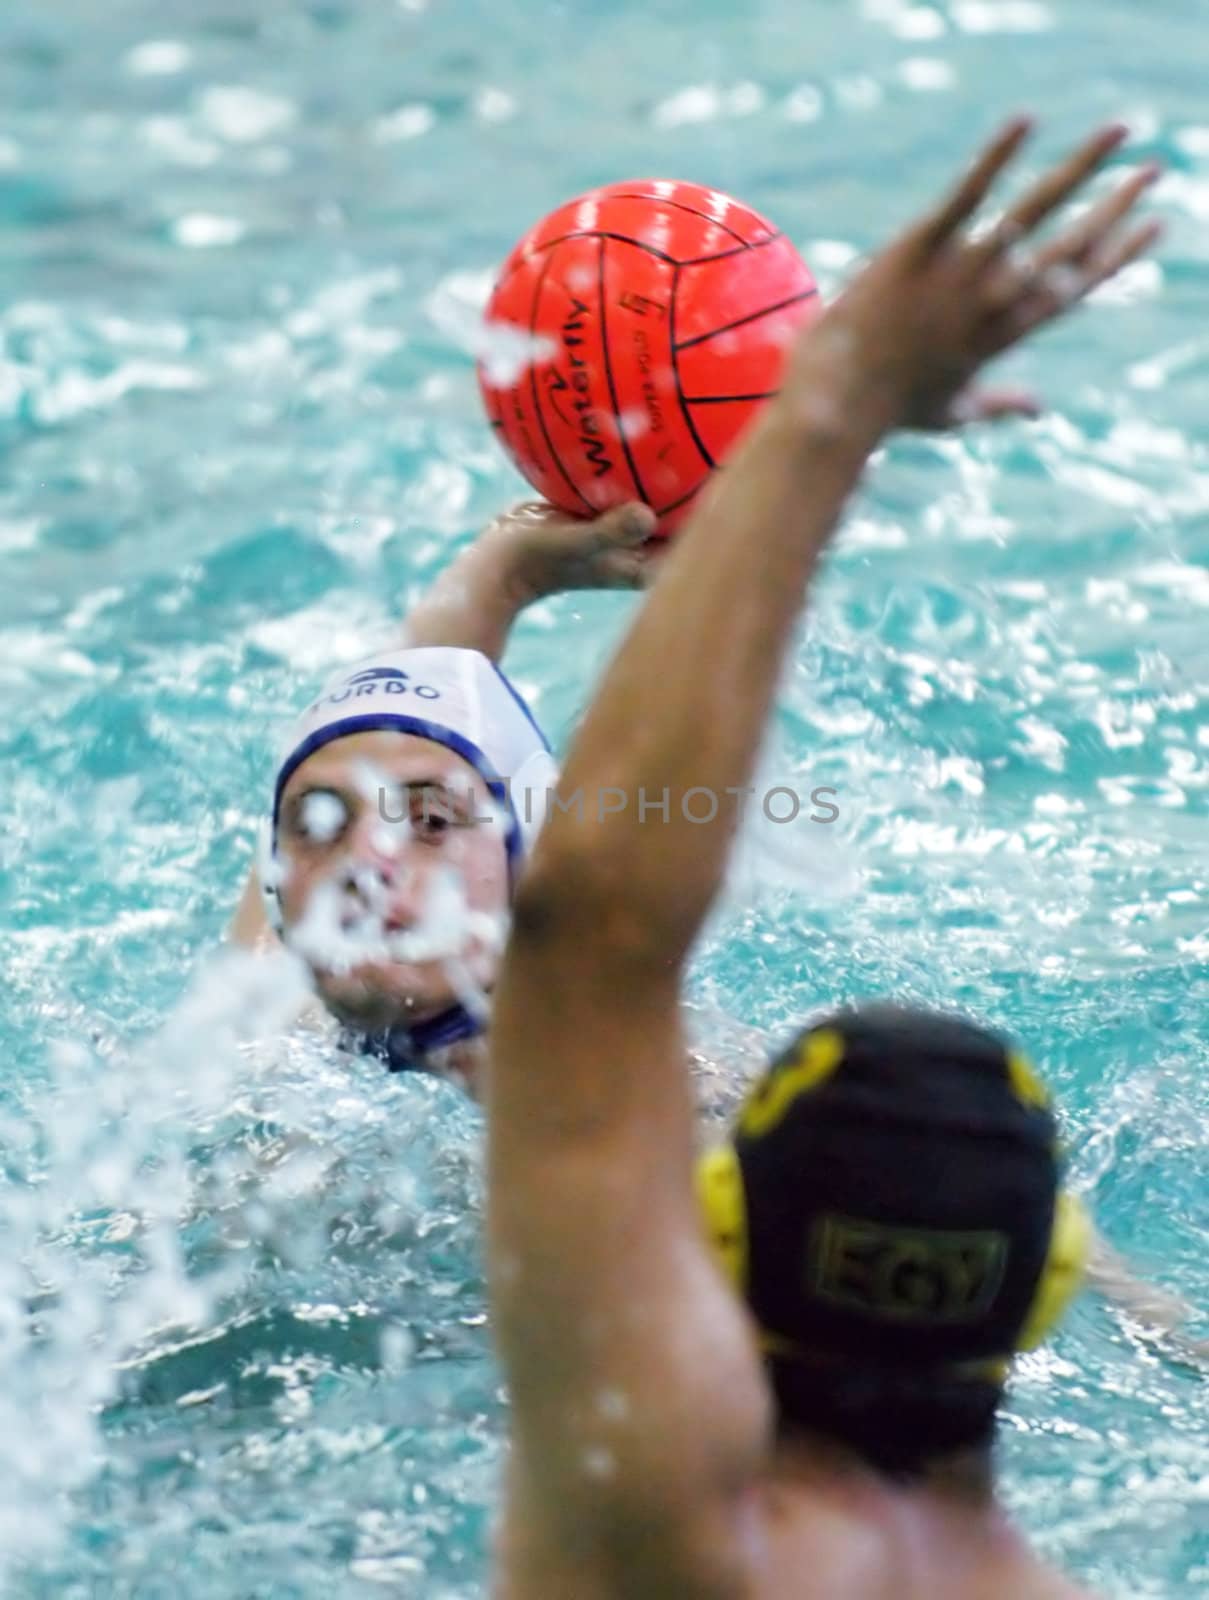 KYIV, UKRAINE - MAY 17: Water Polo match beetwen Ukraine and Egypt national team during The III International Water Polo Tournament in Memory of Oleksiy Barkalov on May 17, 2007 in Kyiv, Ukraine